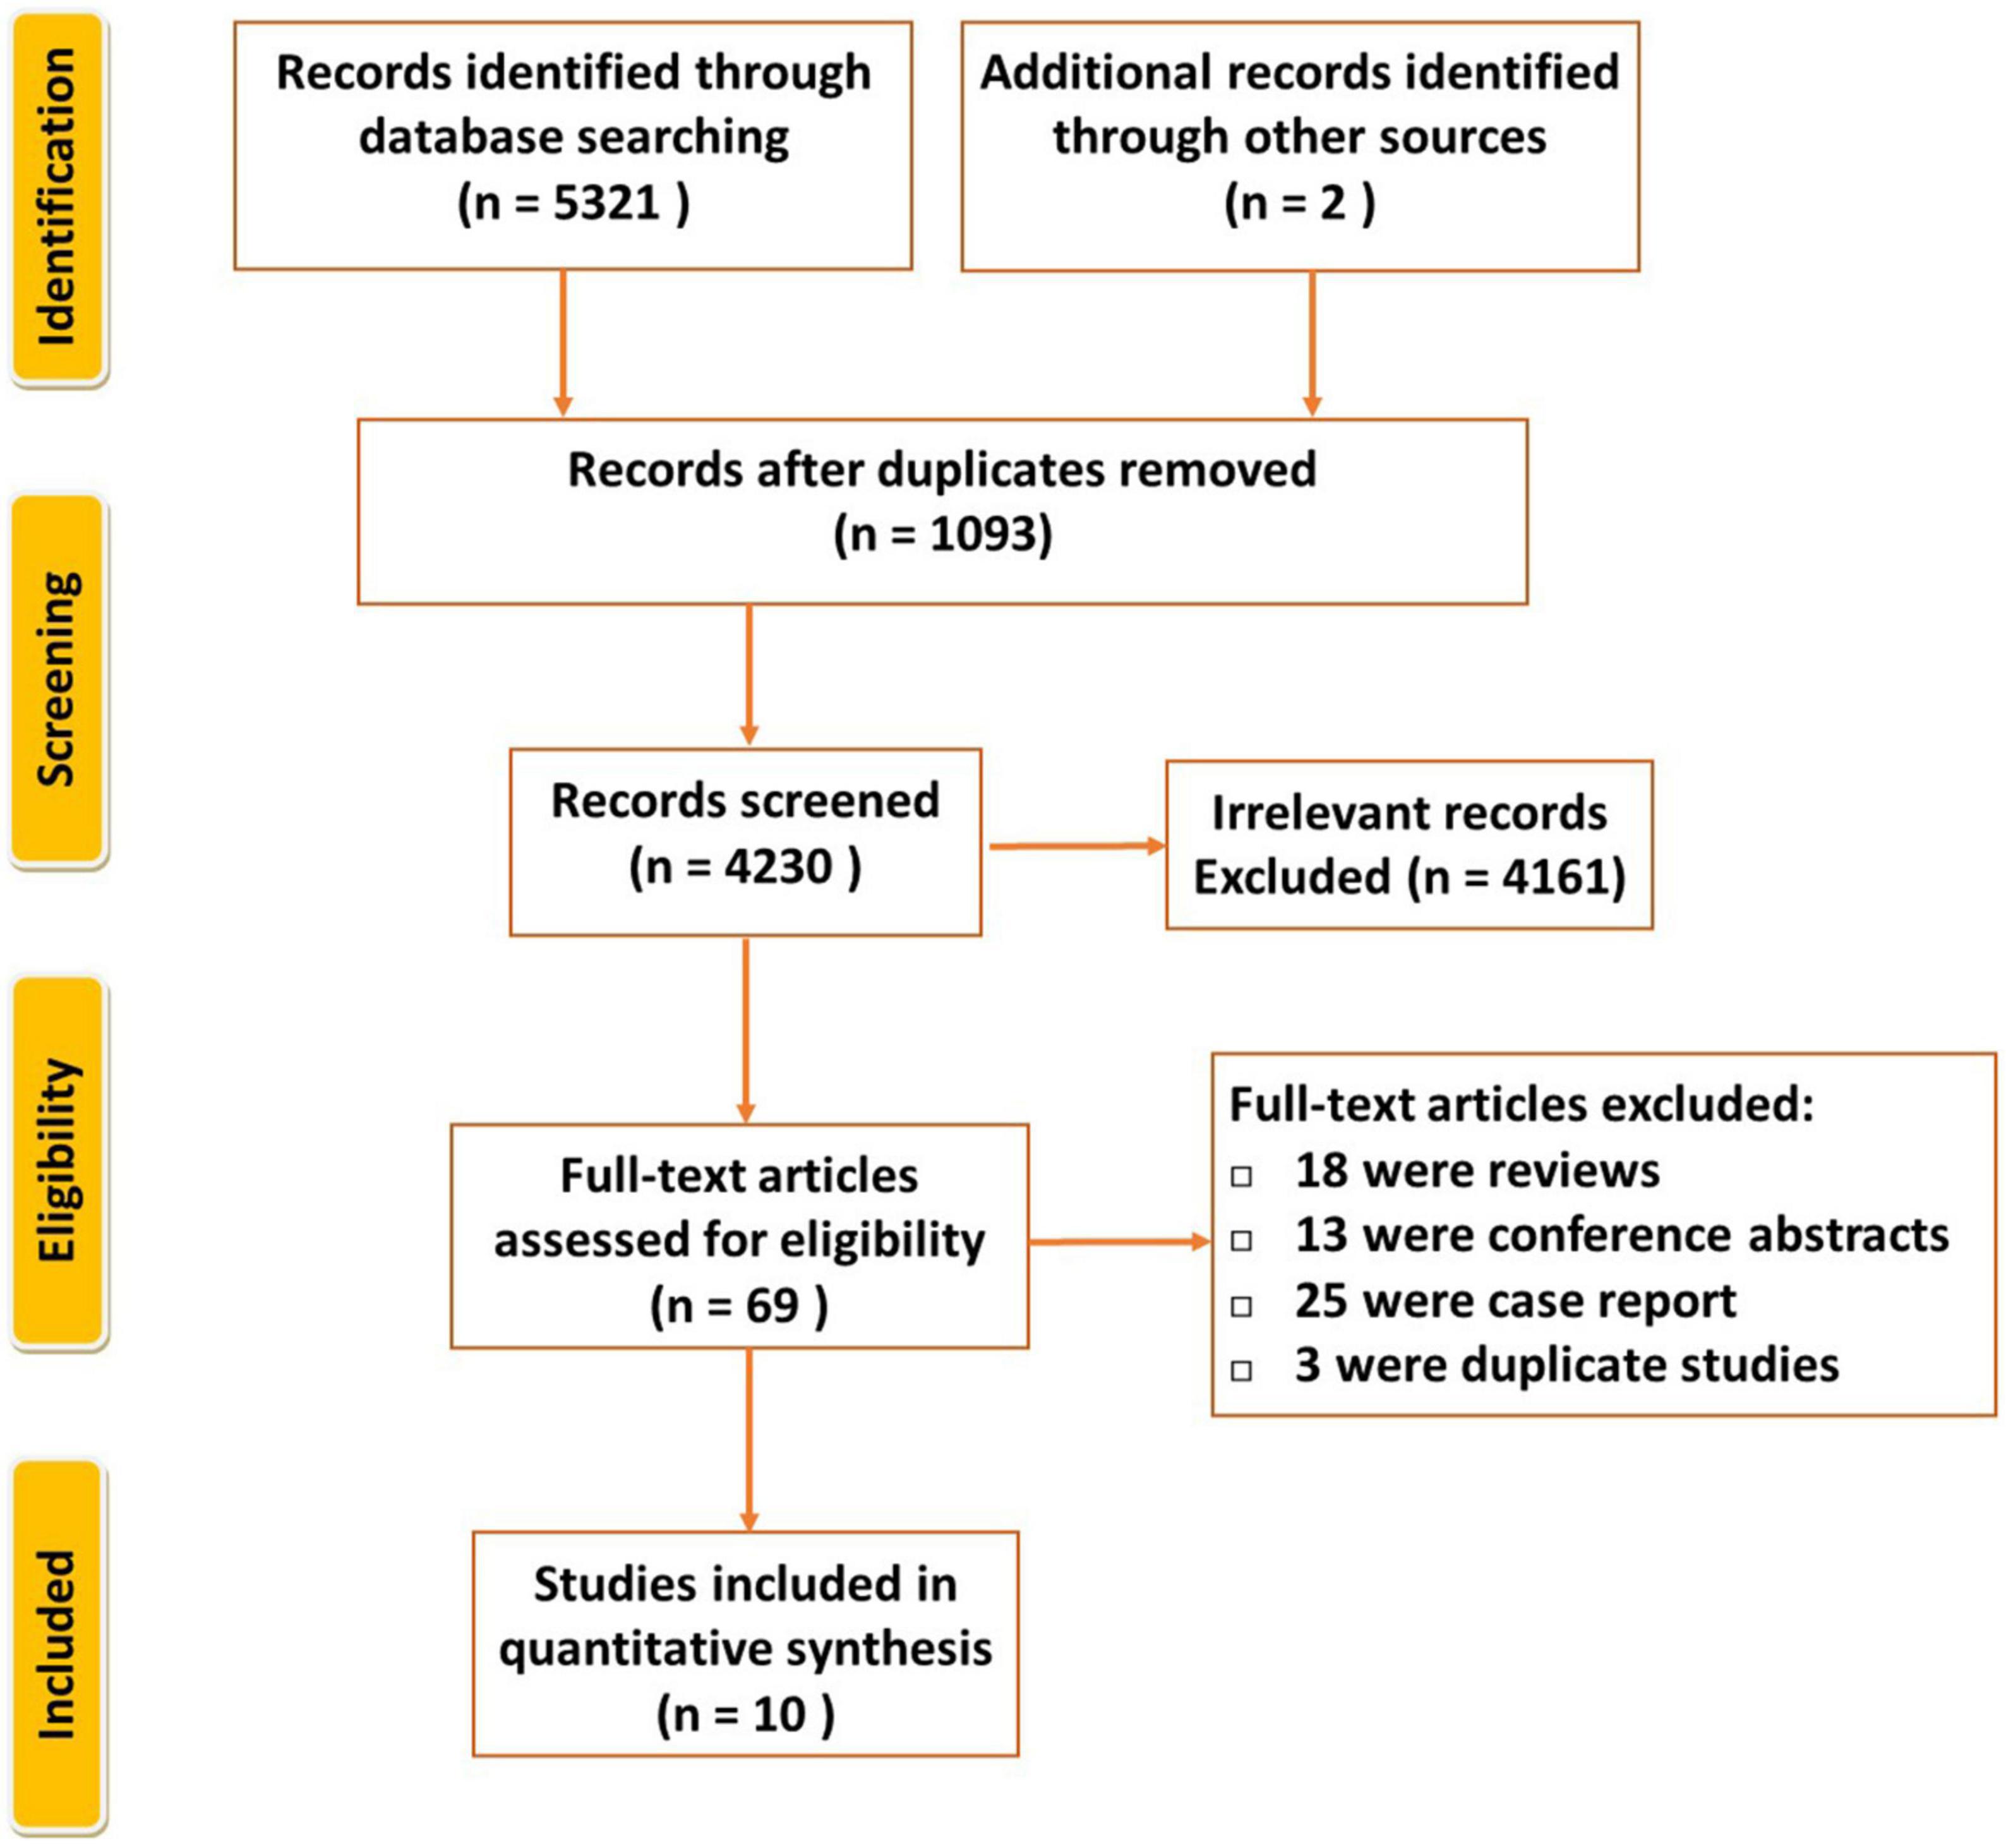 The feasibility and safety of combining atrial septal defect/patent foramen ovale and left atrial appendage closure: A systematic review and meta-analysis